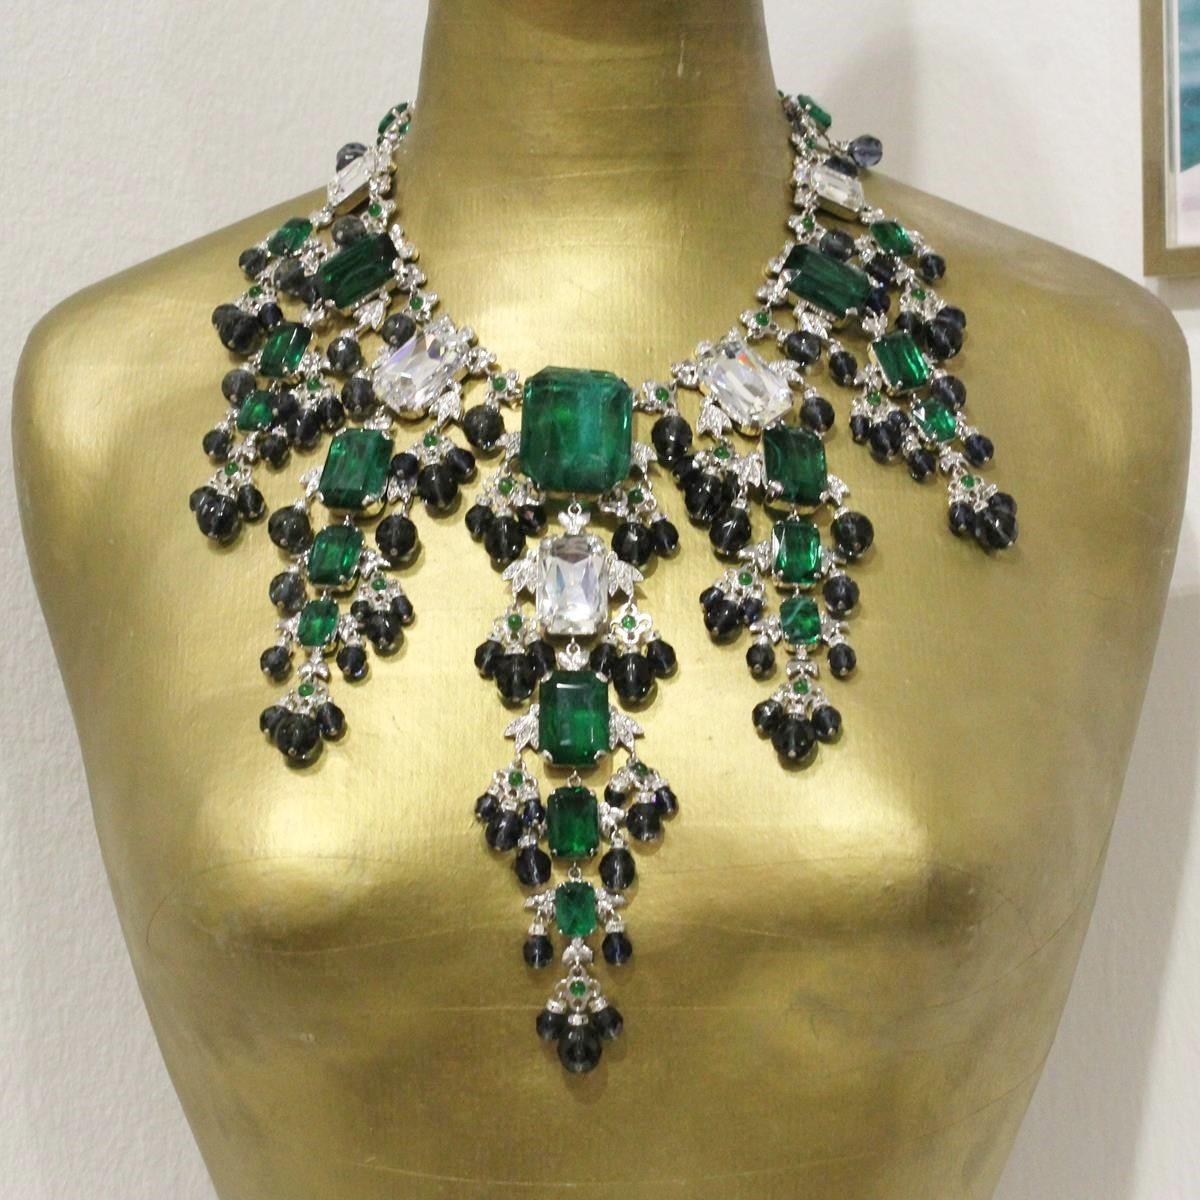 Fantastic masterpiece by Carlo Zini
One of the world greatest bijoux designers
Large collier
Completely handmade
Swarovski crystals
Mervellous creation of  emerald like crystals and sapphire faceted boules
Zyrcons
100% Artisanal work
Worldwide